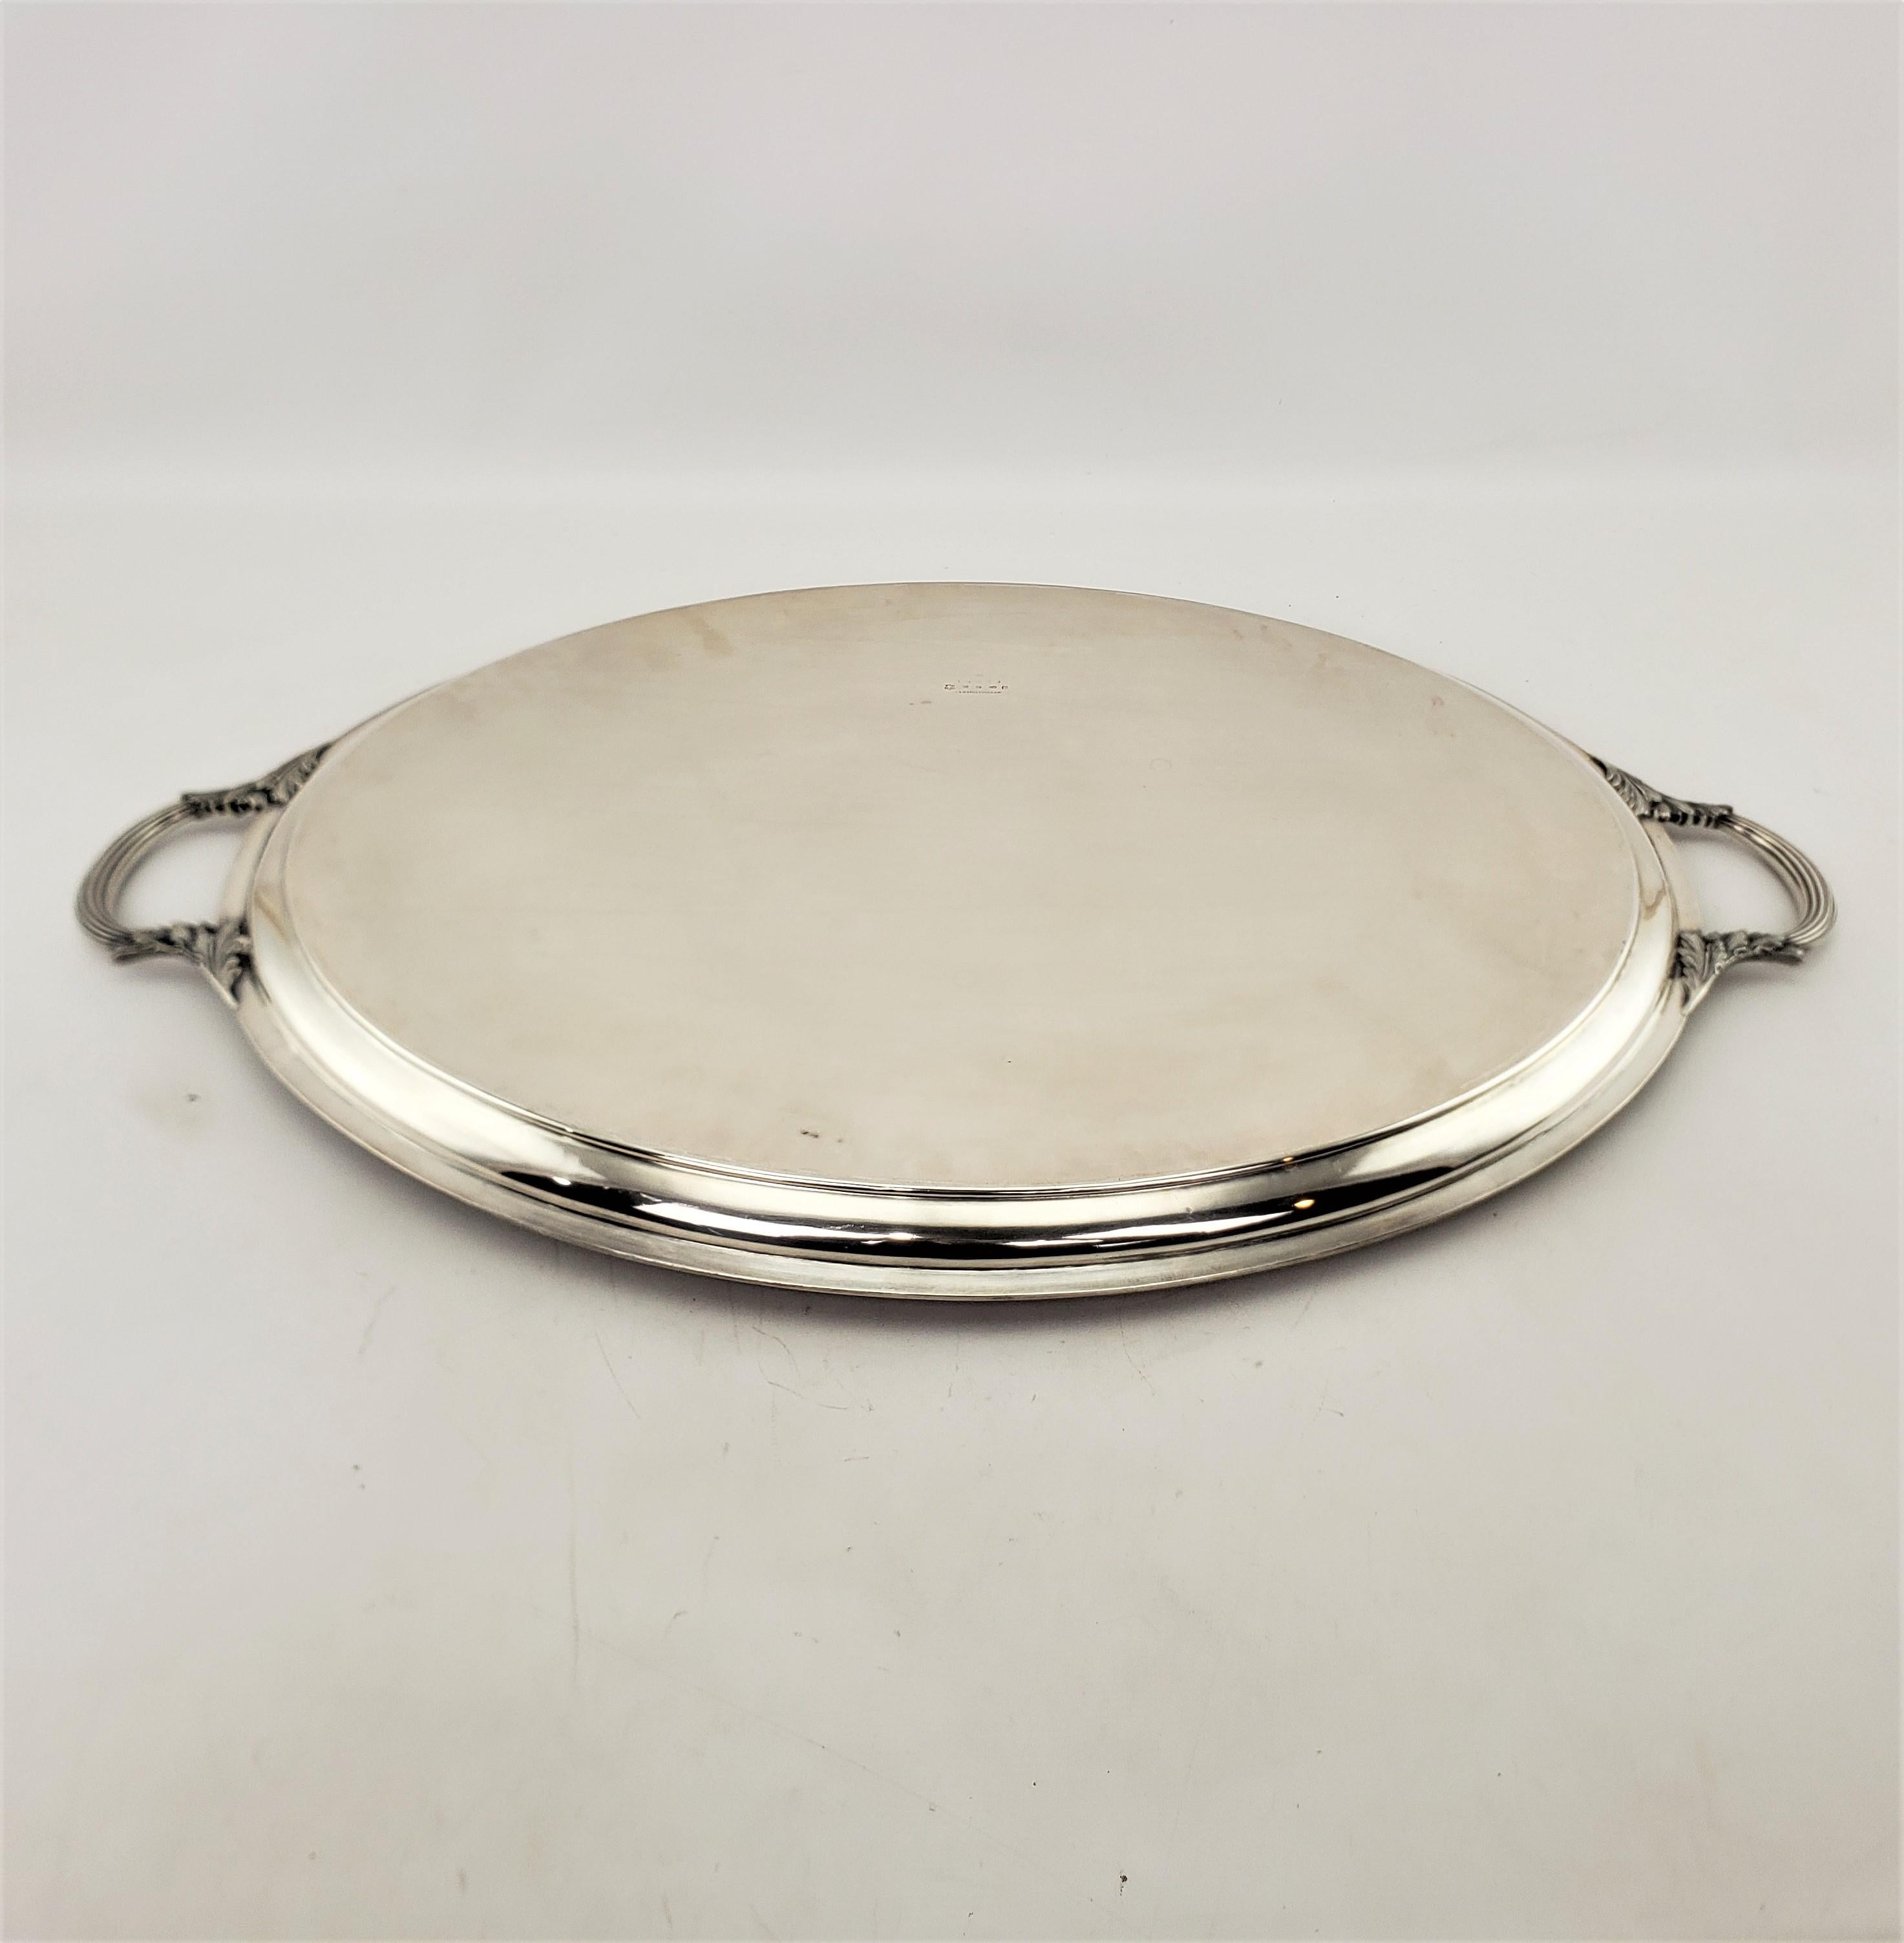 Large Antique Elkington Oval Silver Plated Serving Tray with Floral Engraving For Sale 7